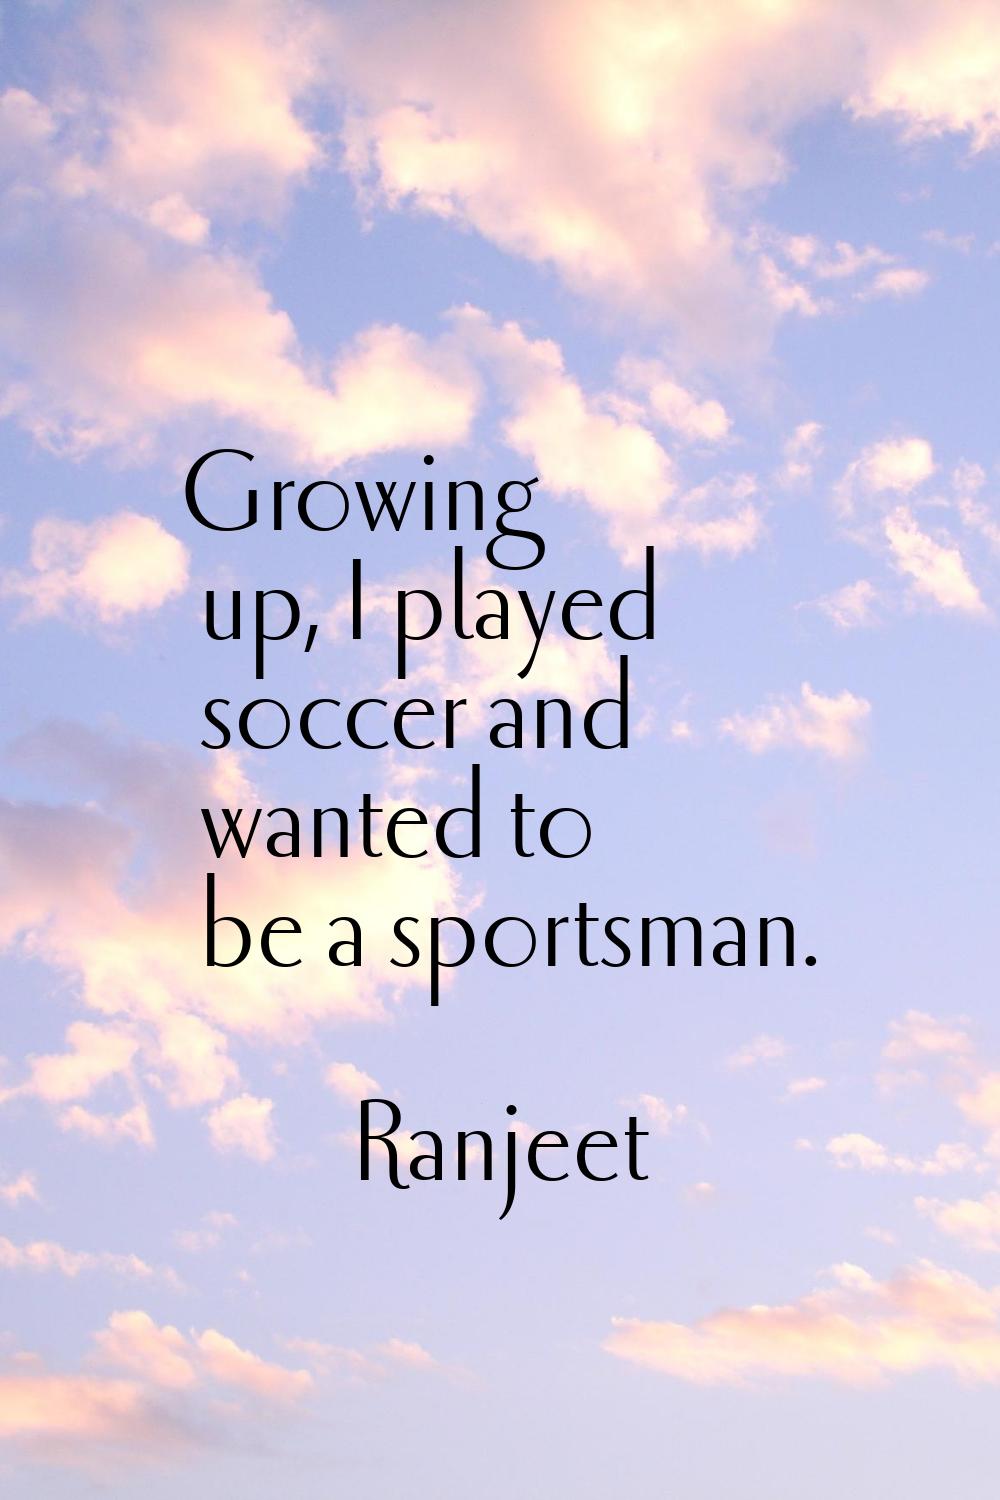 Growing up, I played soccer and wanted to be a sportsman.